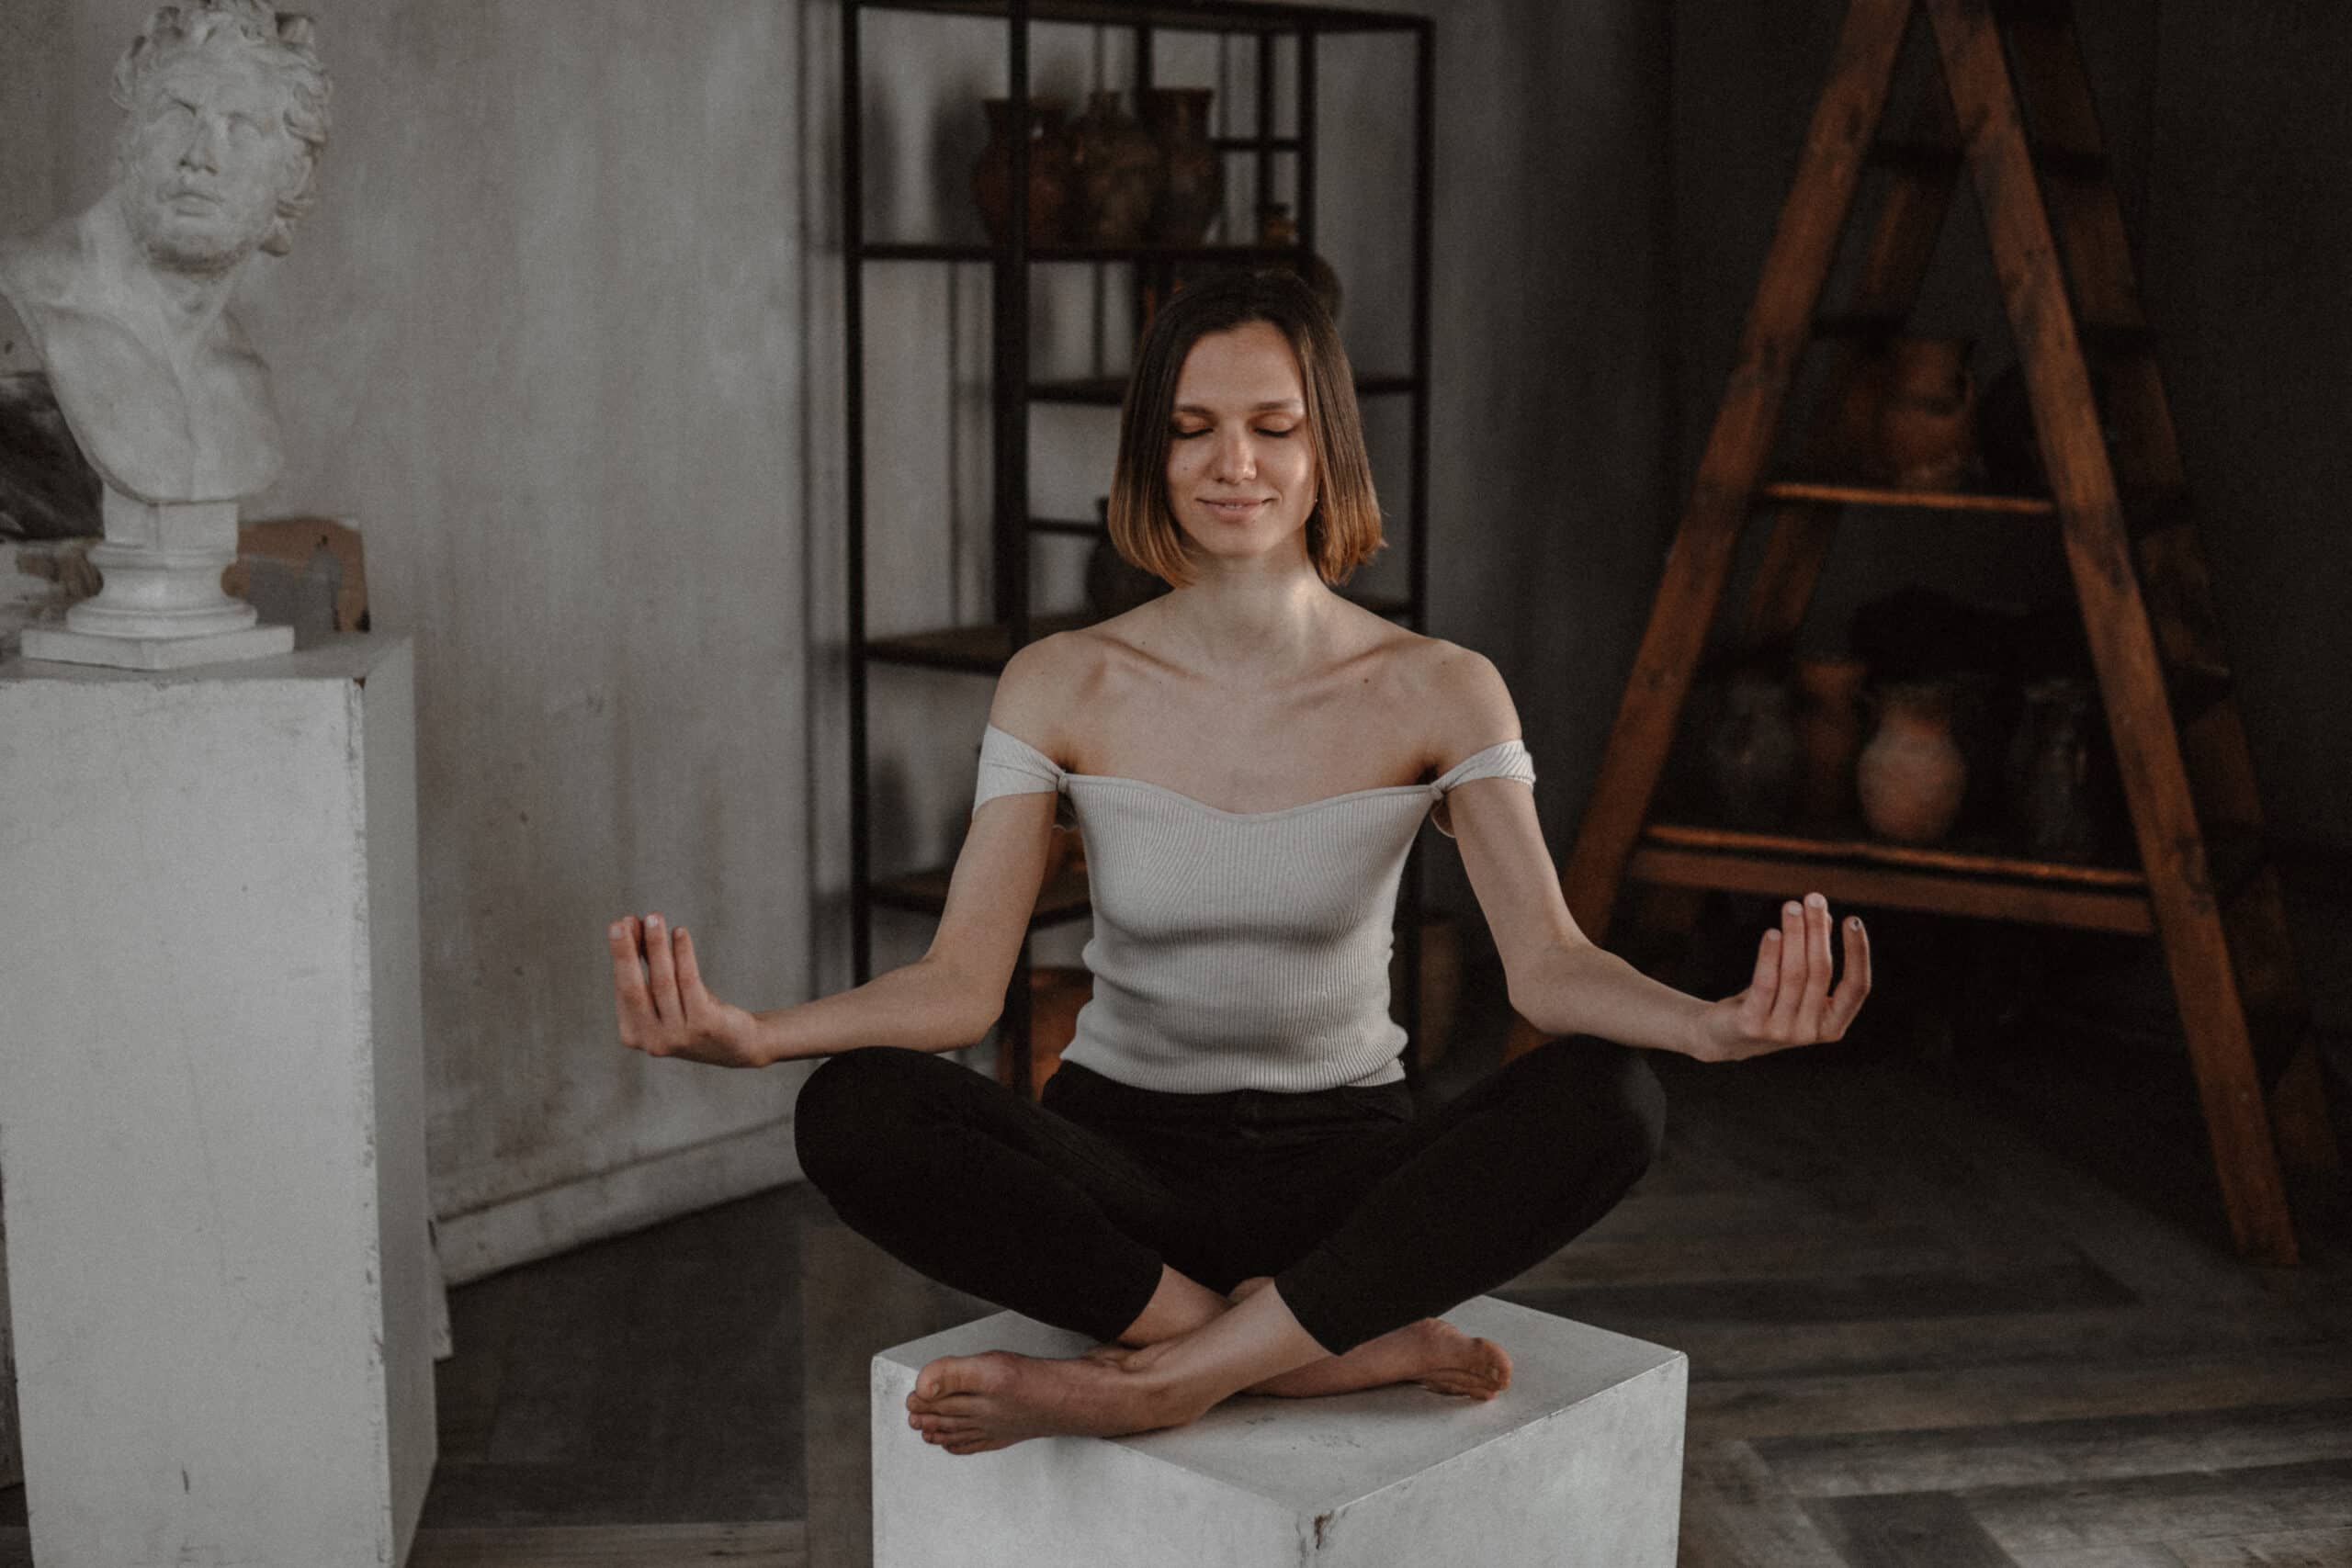 The Cross Legged Meditation Pose and Physical Well-being